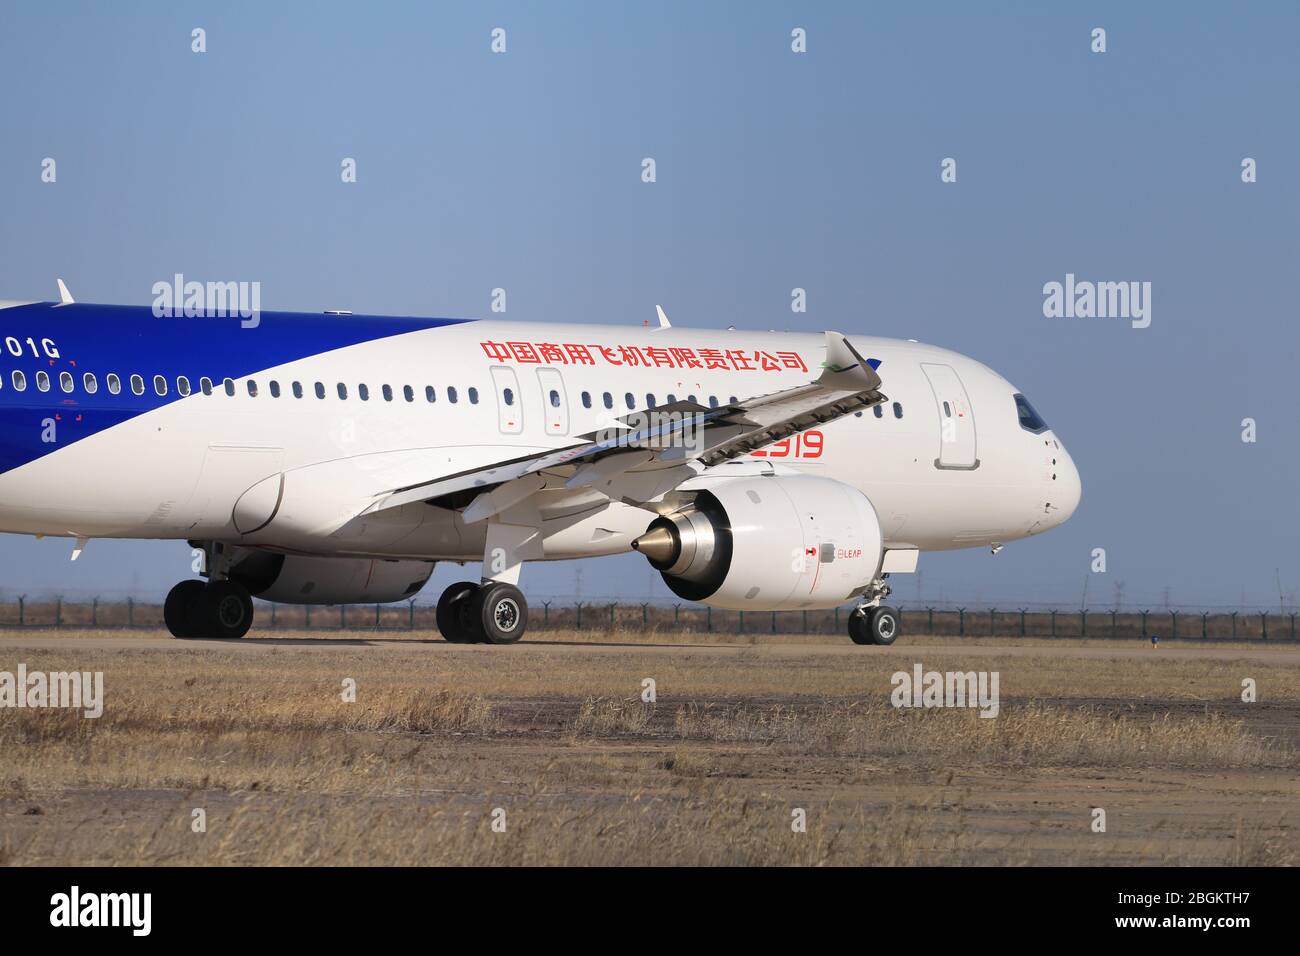 A Comac C919, a narrow-body twinjet airliner developed by Chinese aerospace manufacturer Comac, takes its test flight in Dongying city, east China's S Stock Photo